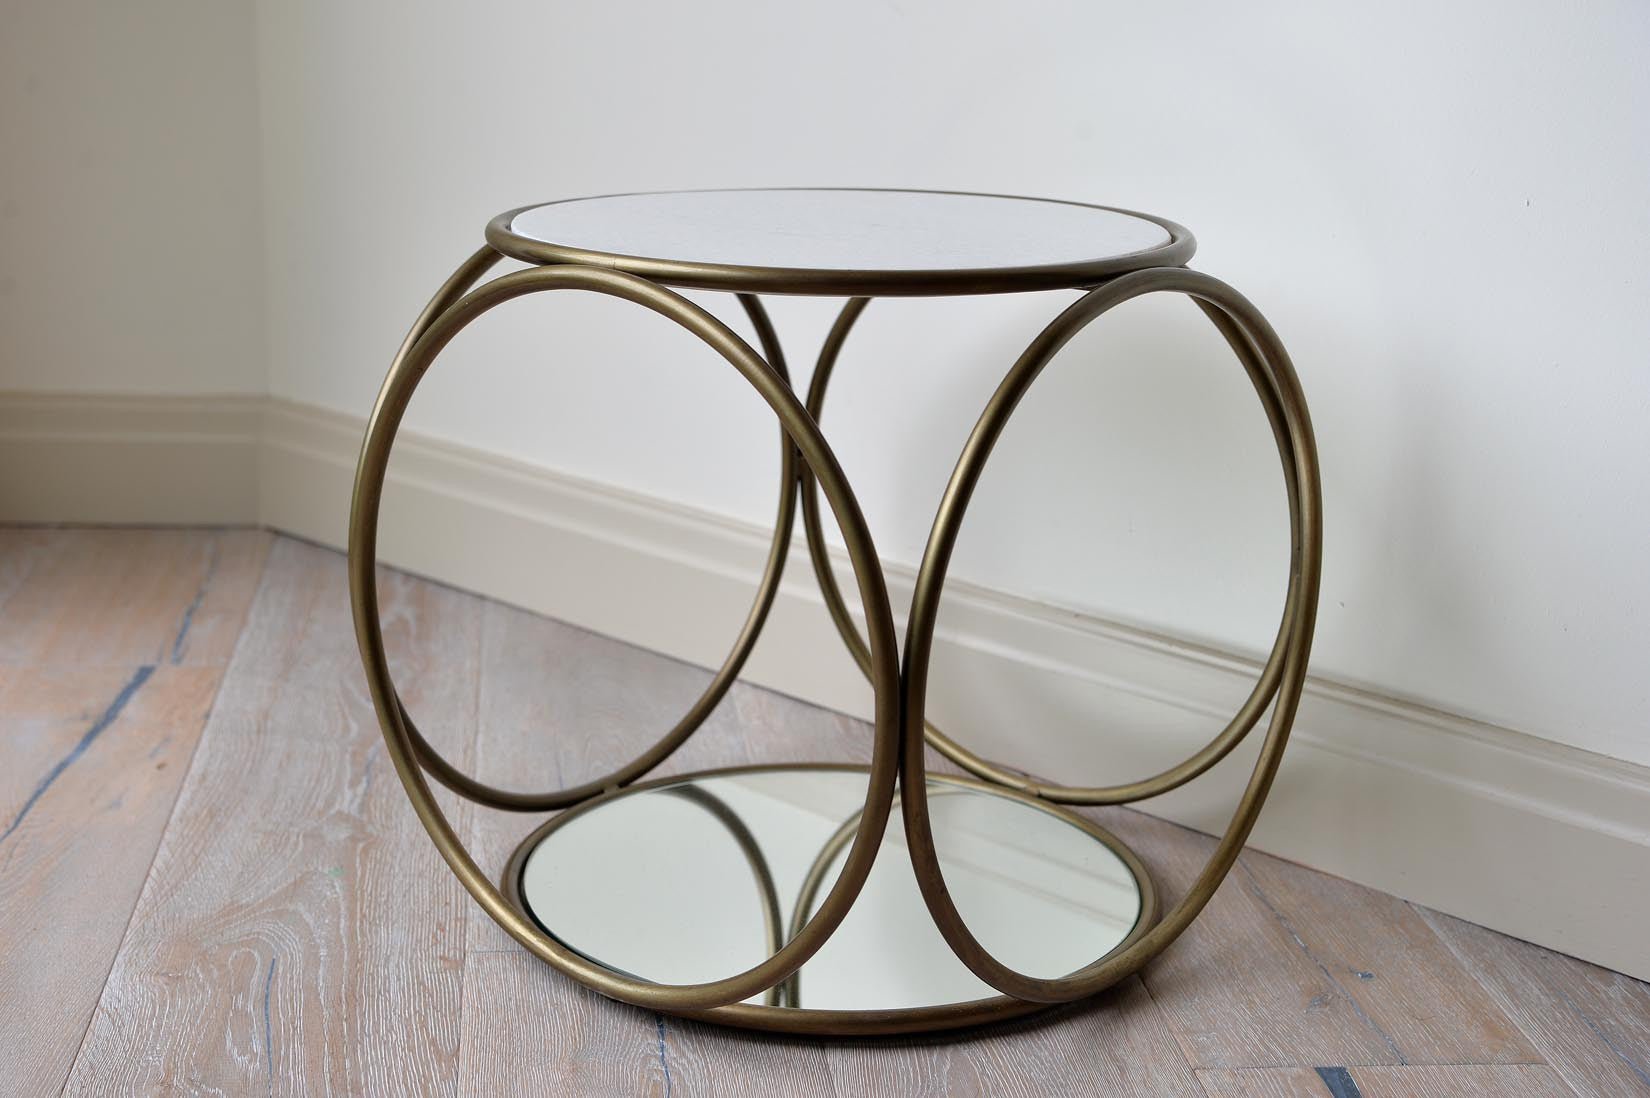 Marble and brass round coffee table - Natalia Willmott